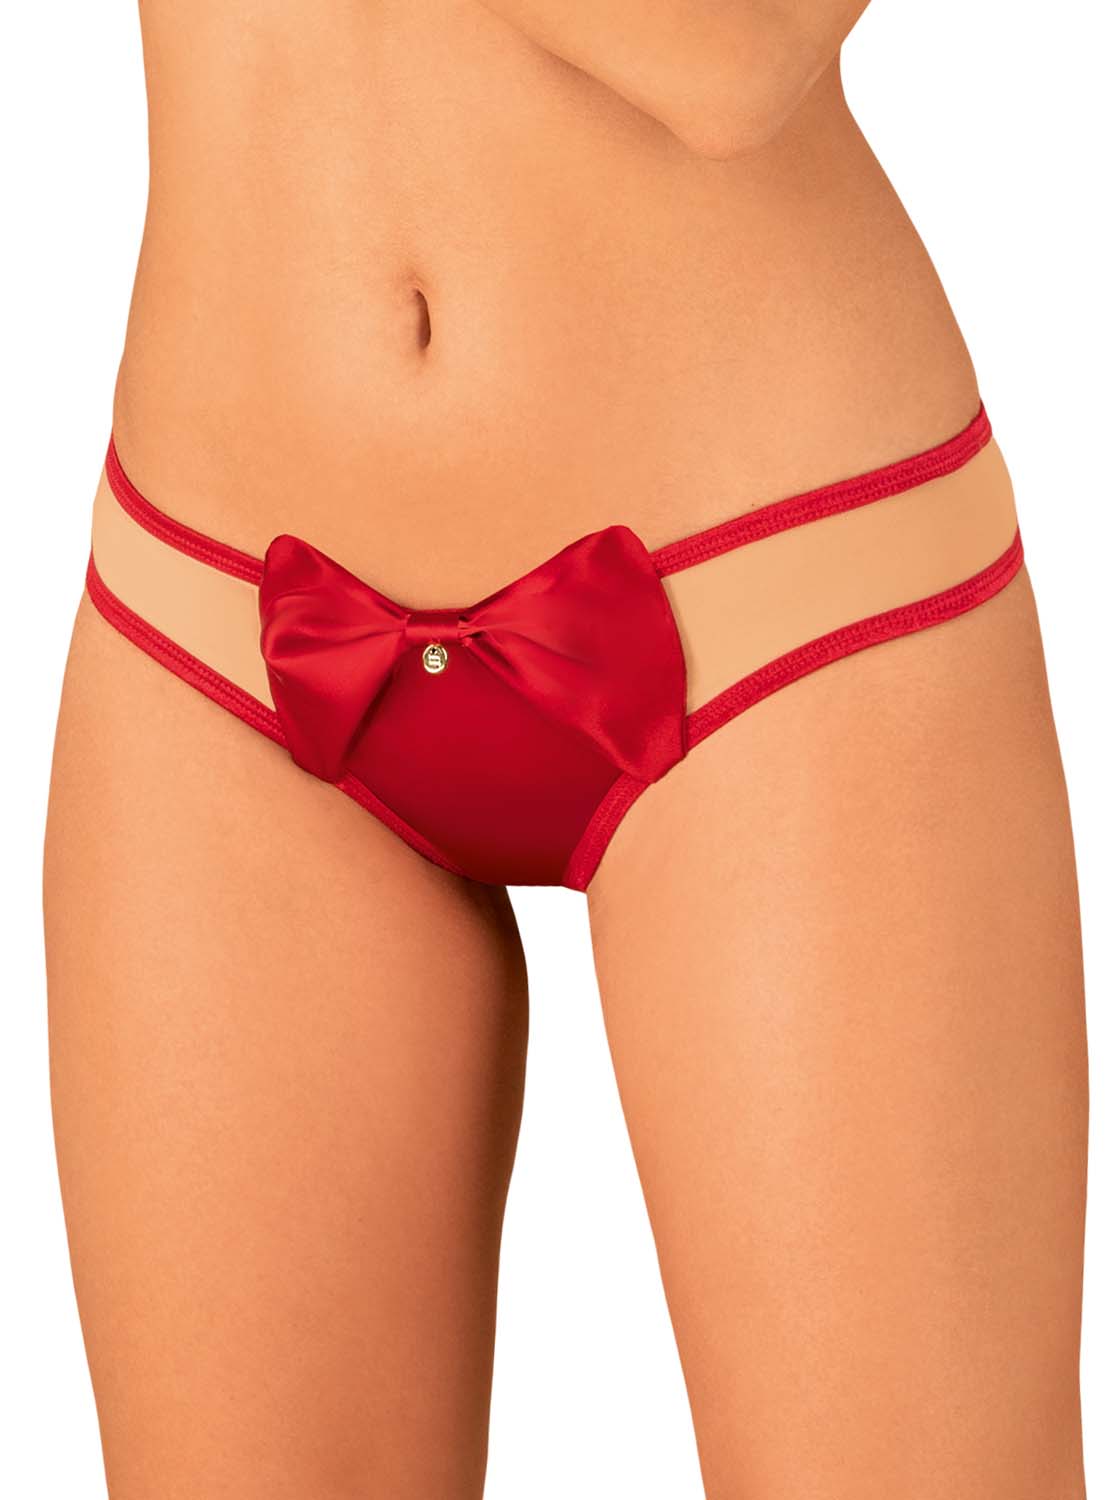 Rubinesa a playful thong in a combination of skin-colored and red material, a red satin bow and a shiny jewelry detail on the front